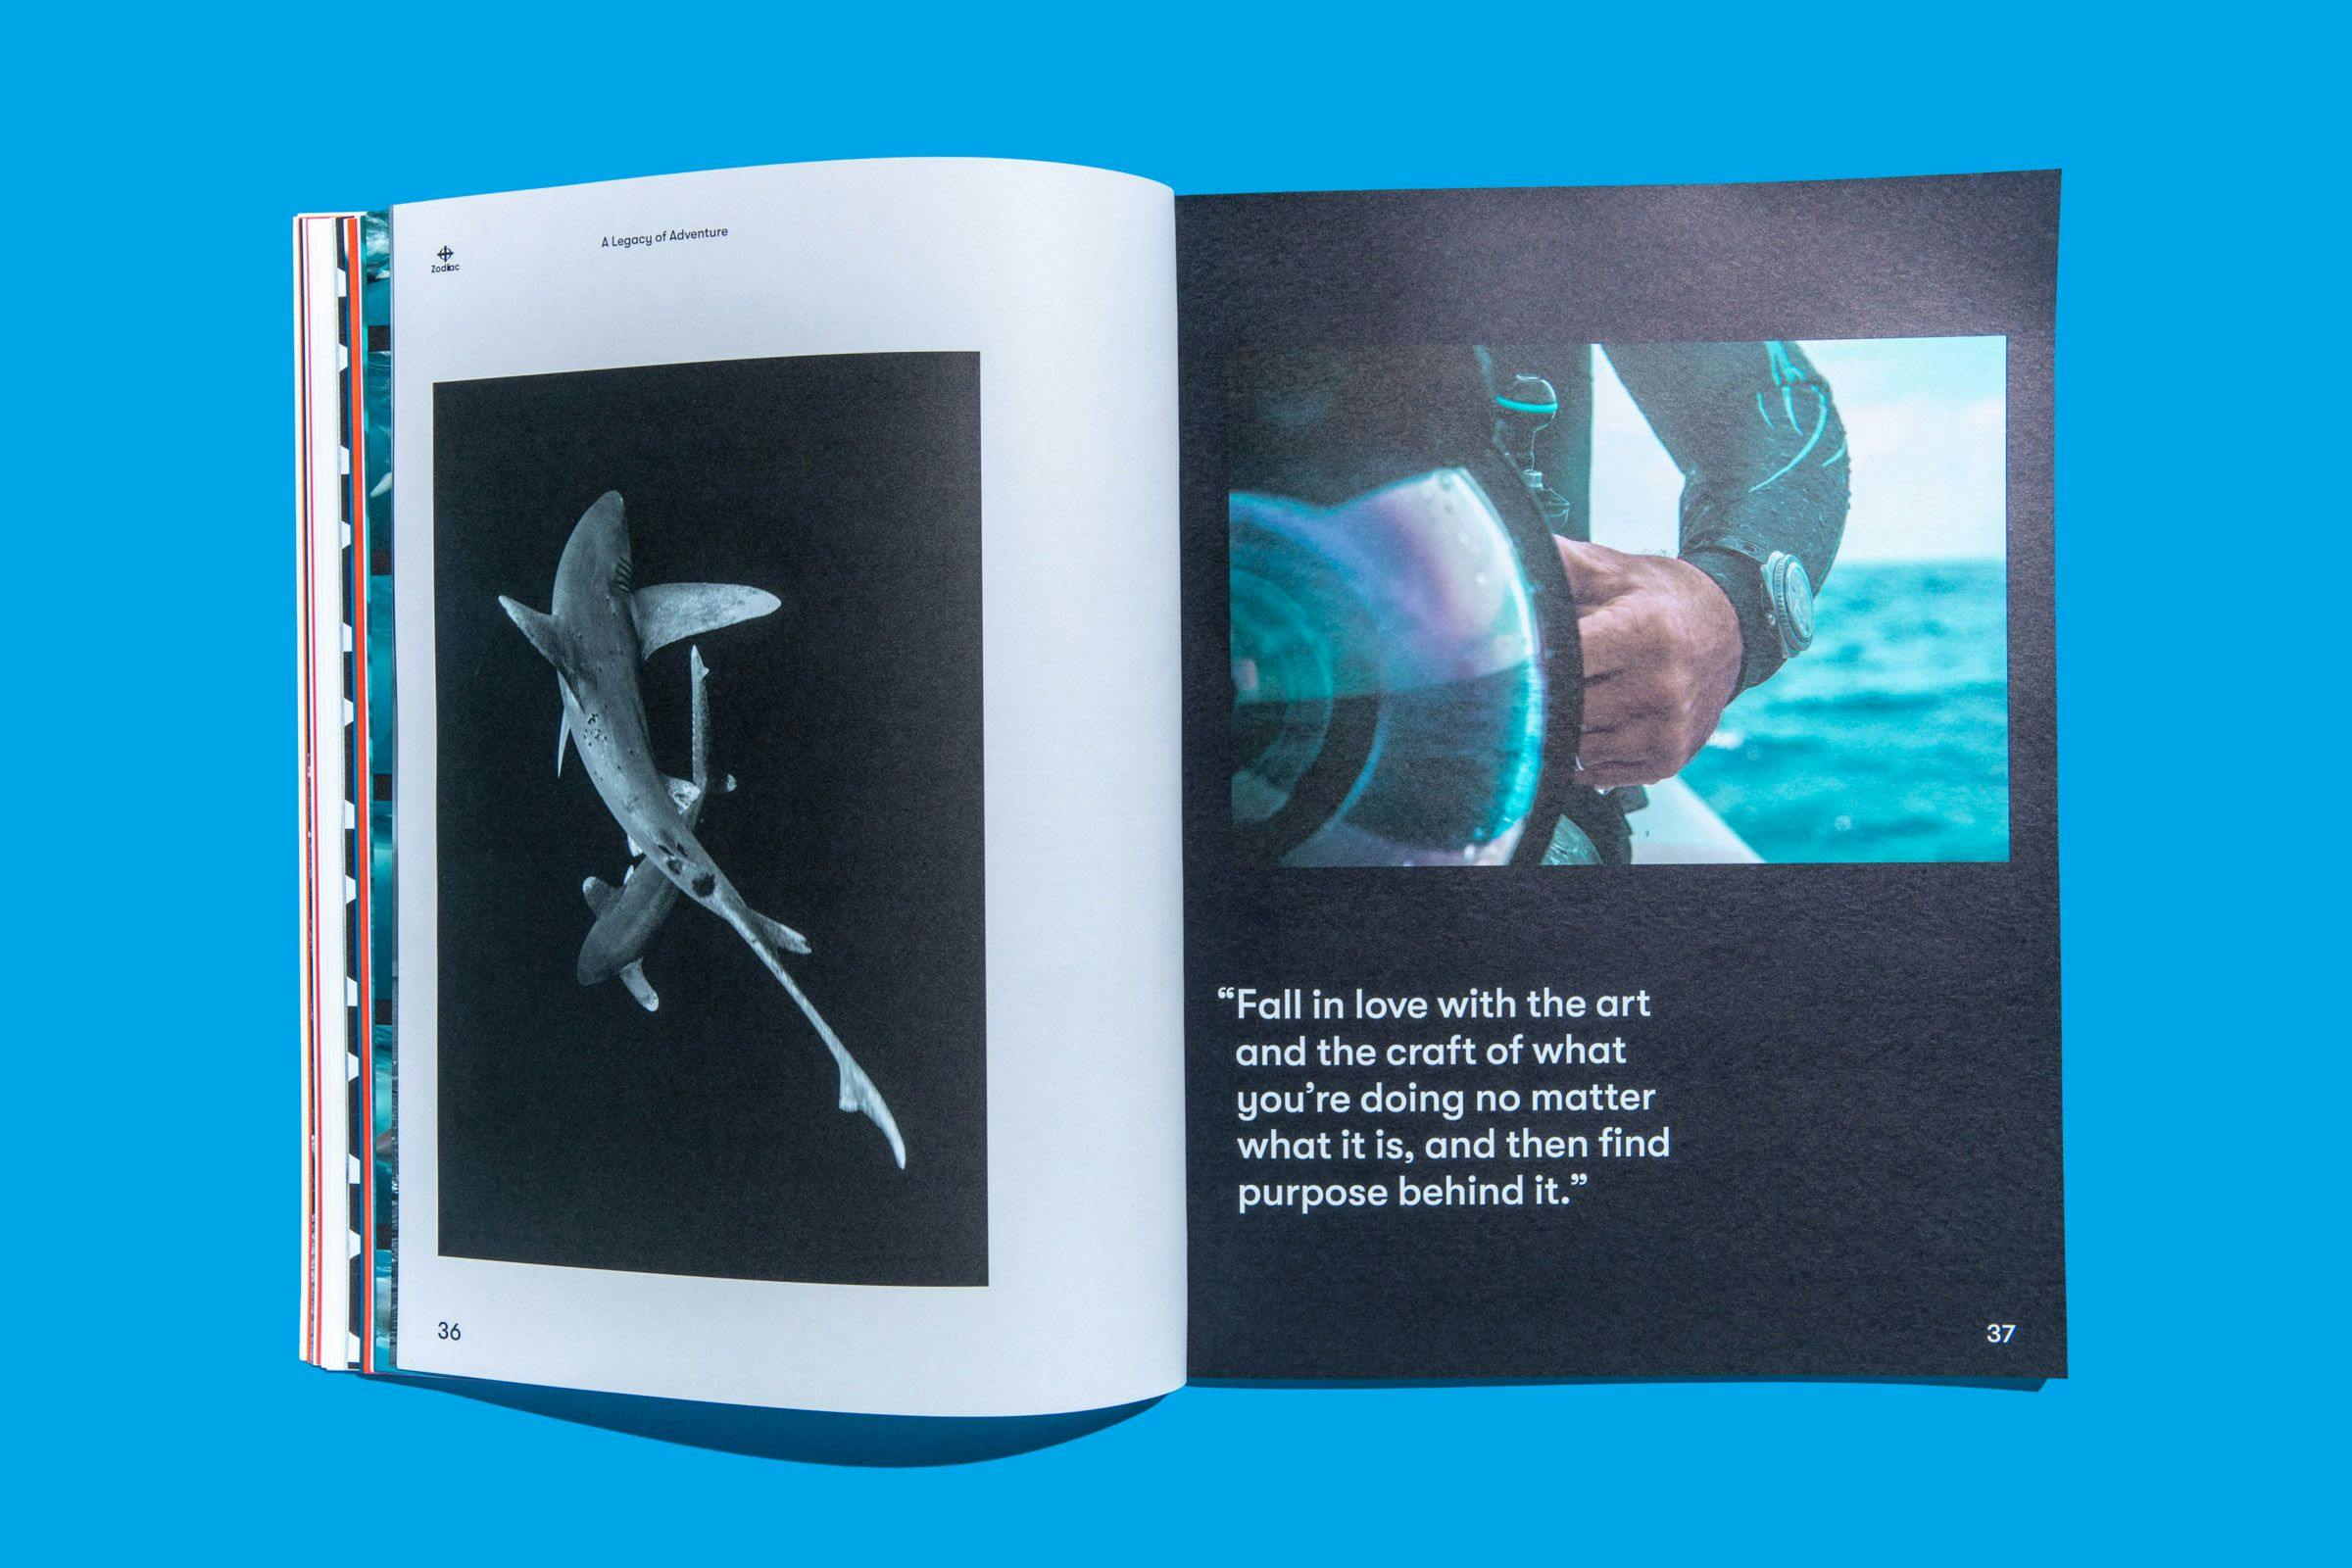 Pages from the Zodiac Watches: Brand Book with photos of a shark and a diver wearing a Zodiac Watch